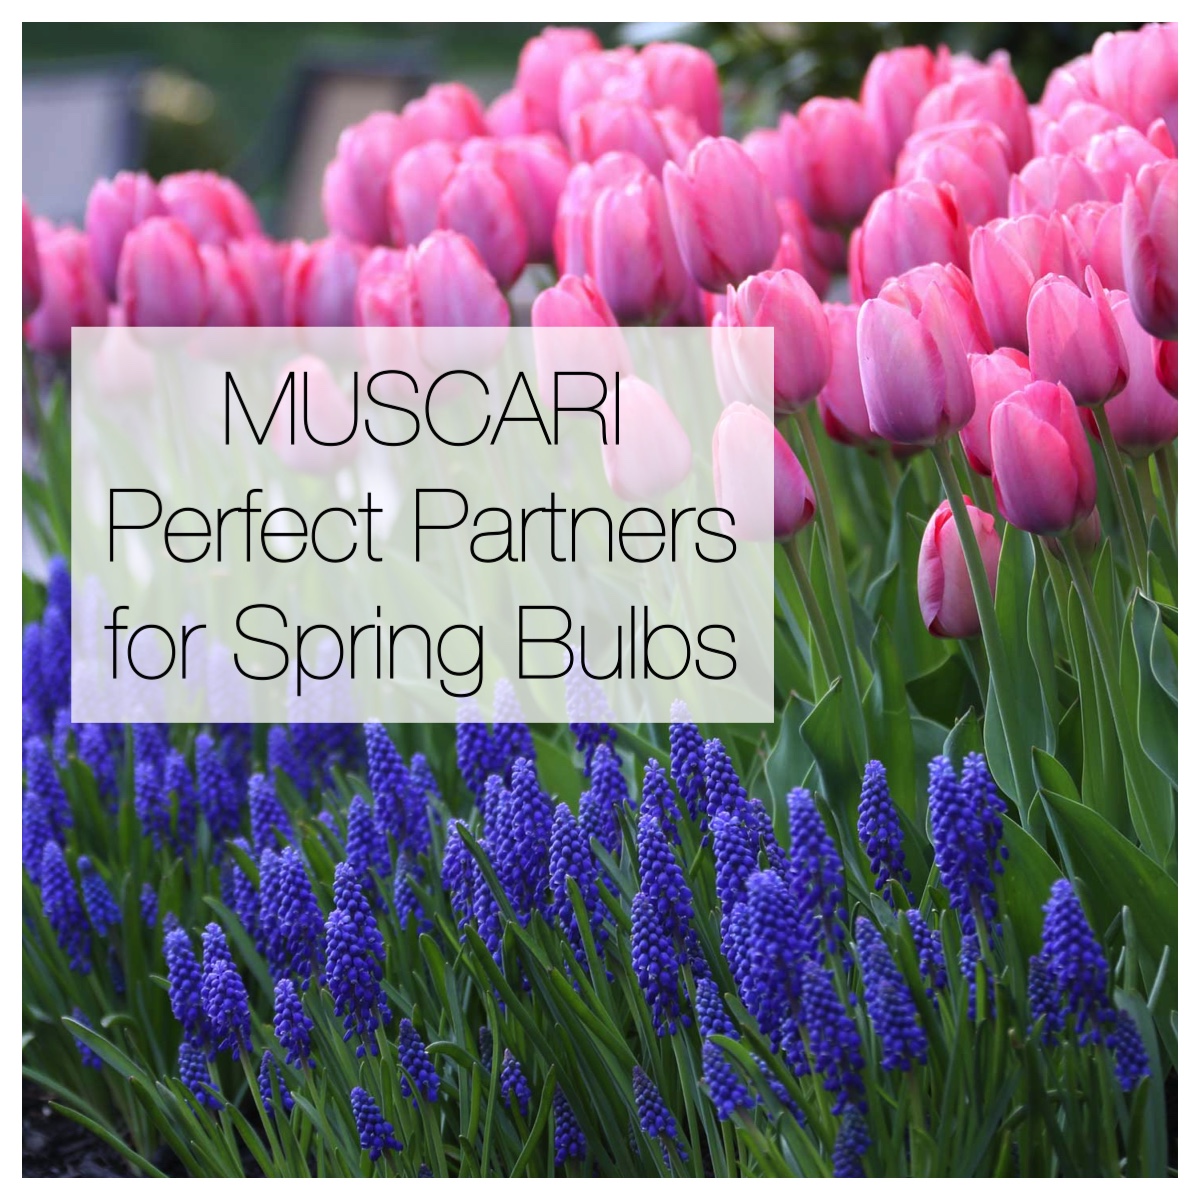 Muscari: Perfect Partners for Spring Bulbs